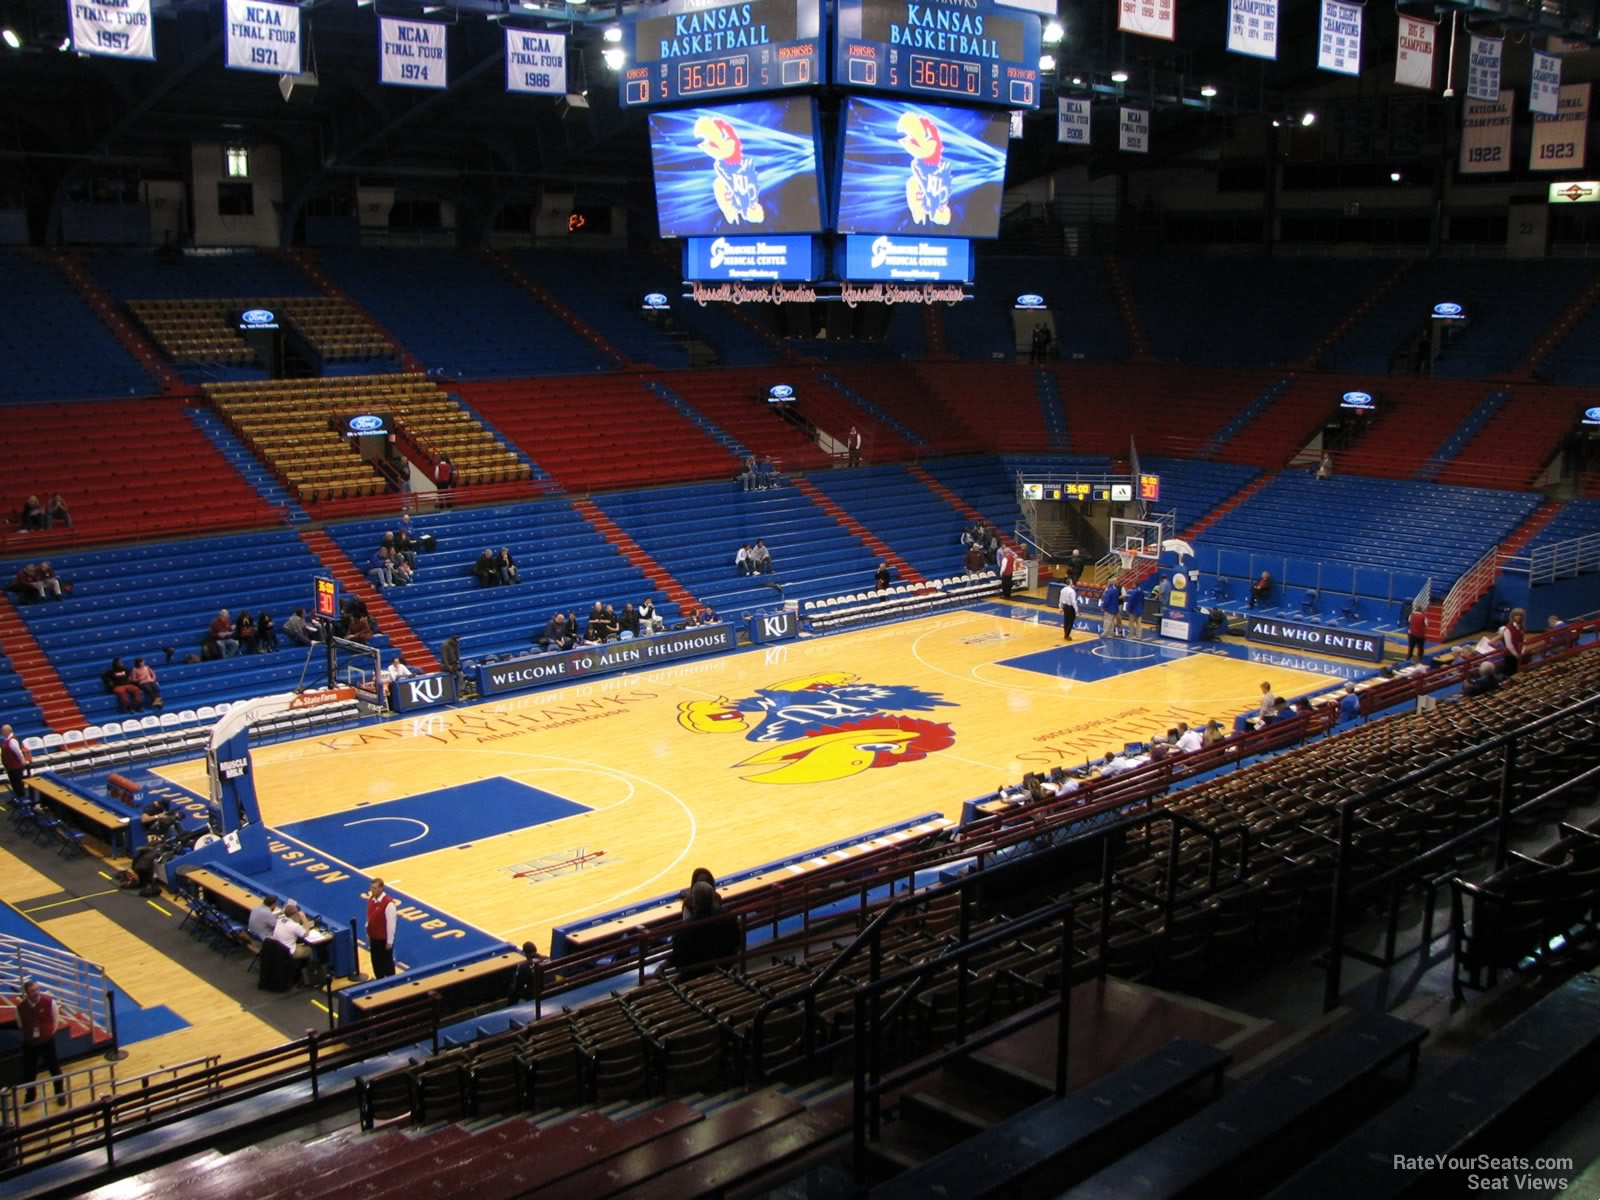 section 9, row 18 seat view  - allen fieldhouse